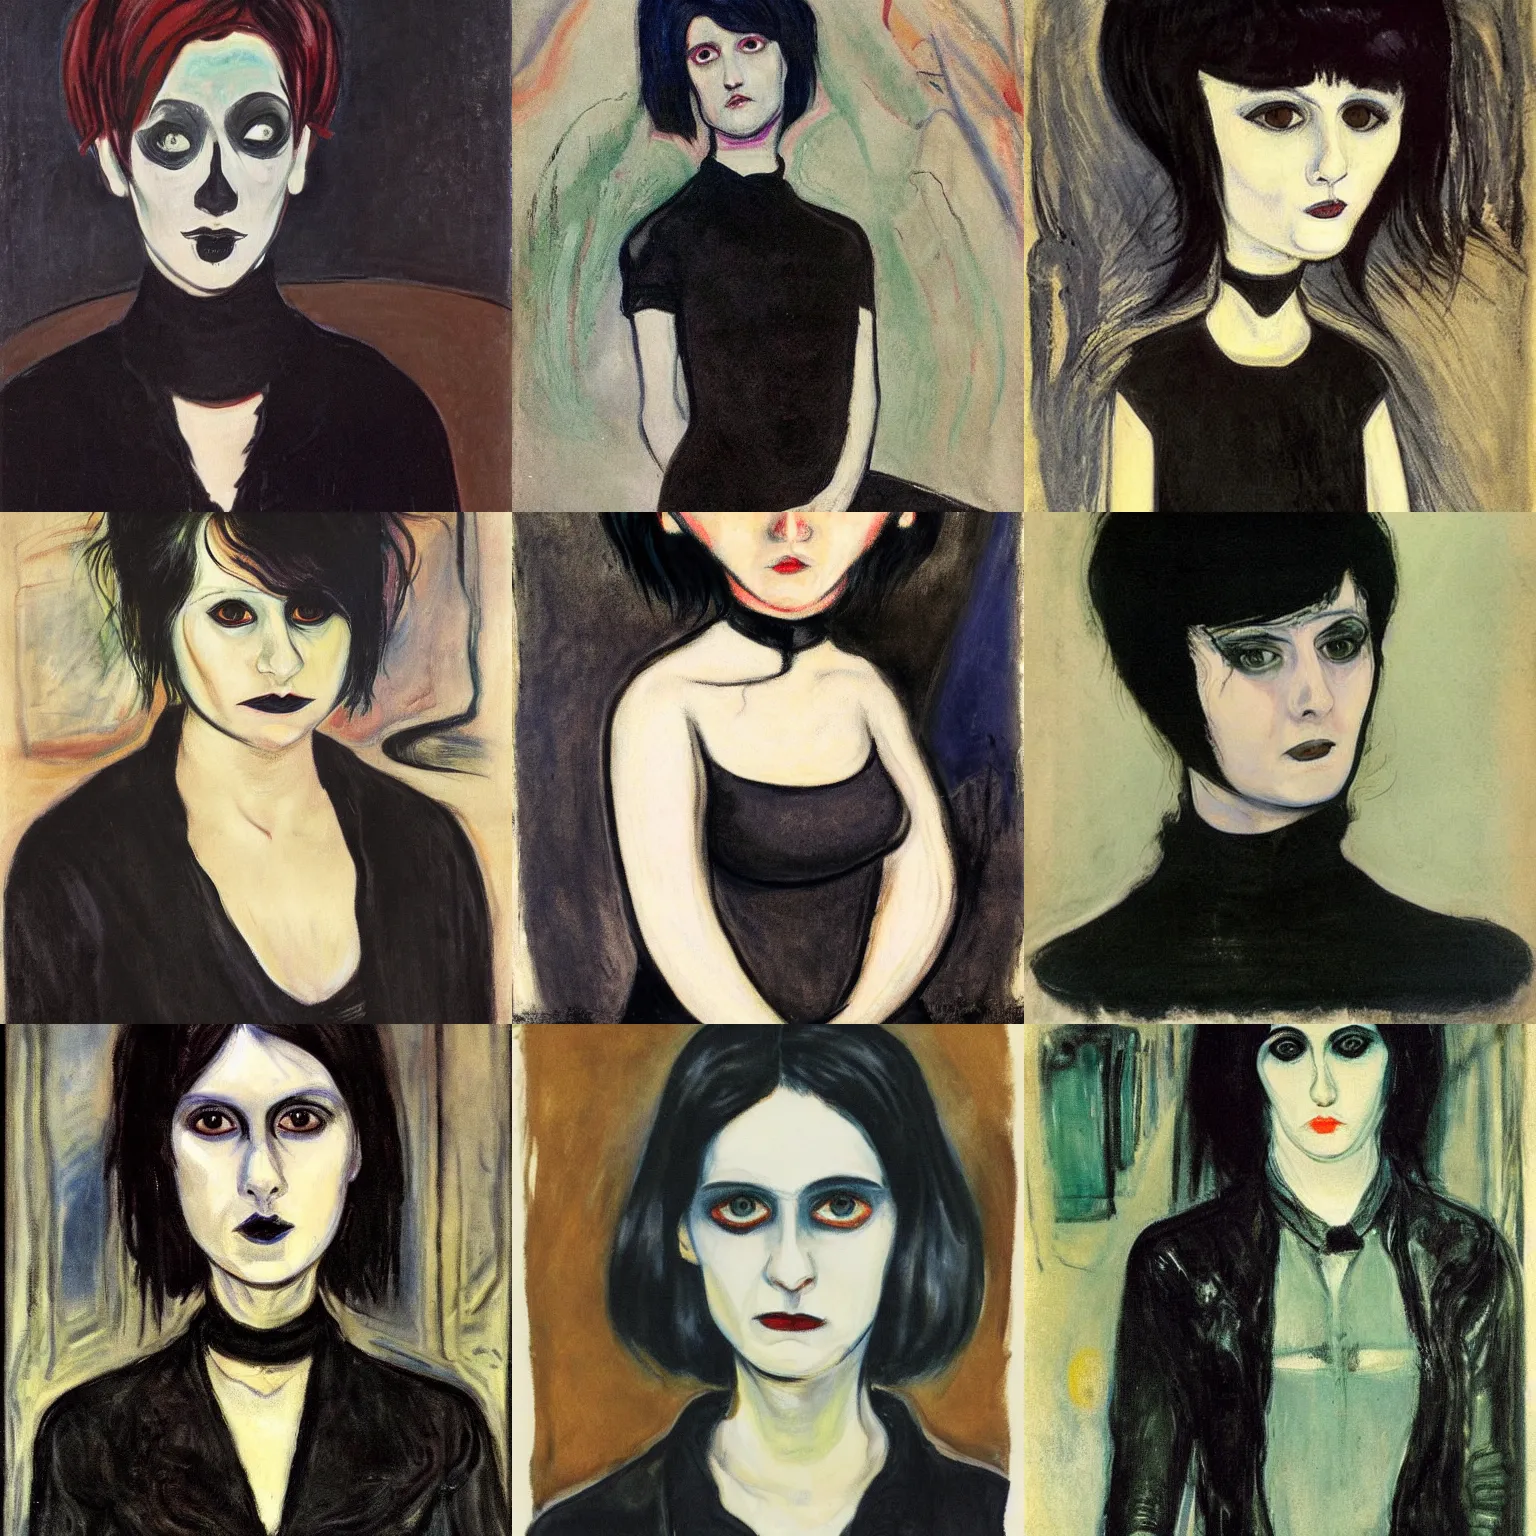 Prompt: A goth painted by Edvard Munch. Her hair is dark brown and cut into a short, messy pixie cut. She has a slightly rounded face, with a pointed chin, large entirely-black eyes, and a small nose. She is wearing a black tank top, a black leather jacket, a black knee-length skirt, a black choker, and black leather boots.